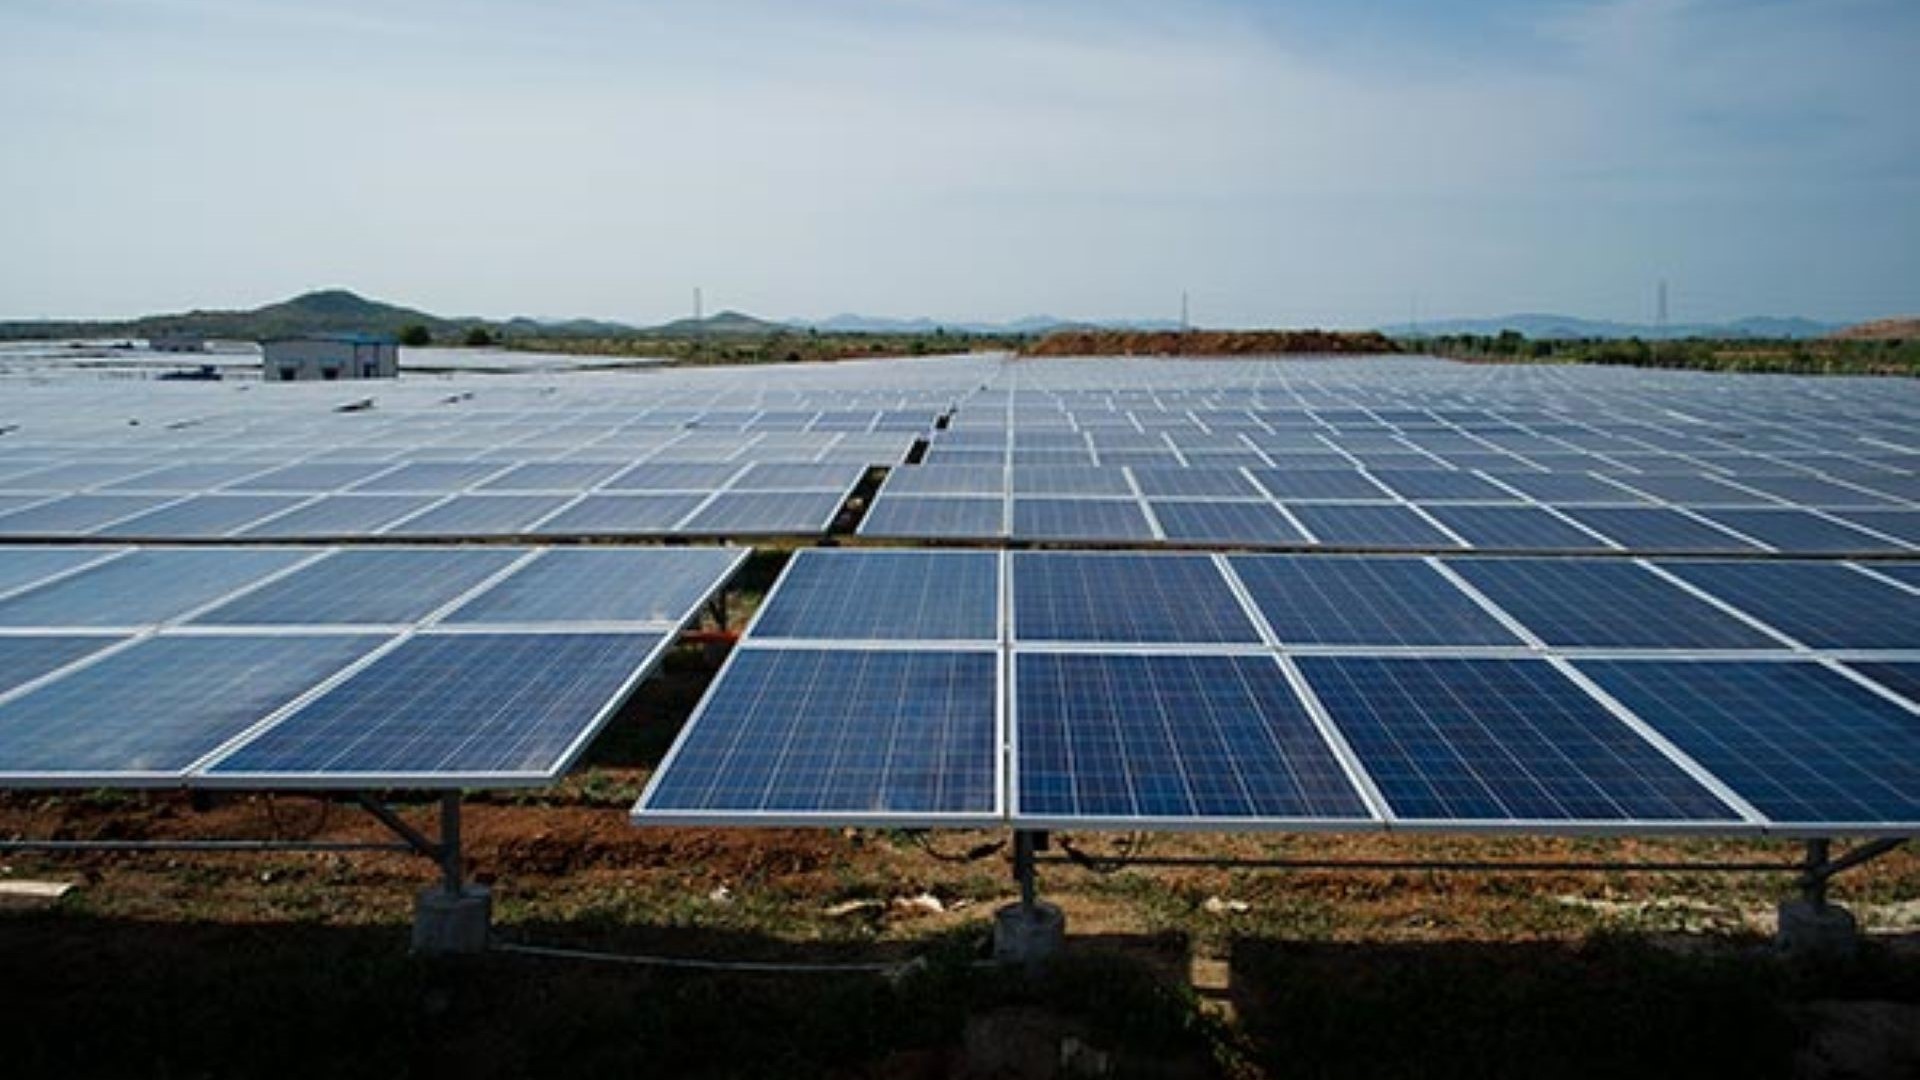 A TPSSL solar plant in India